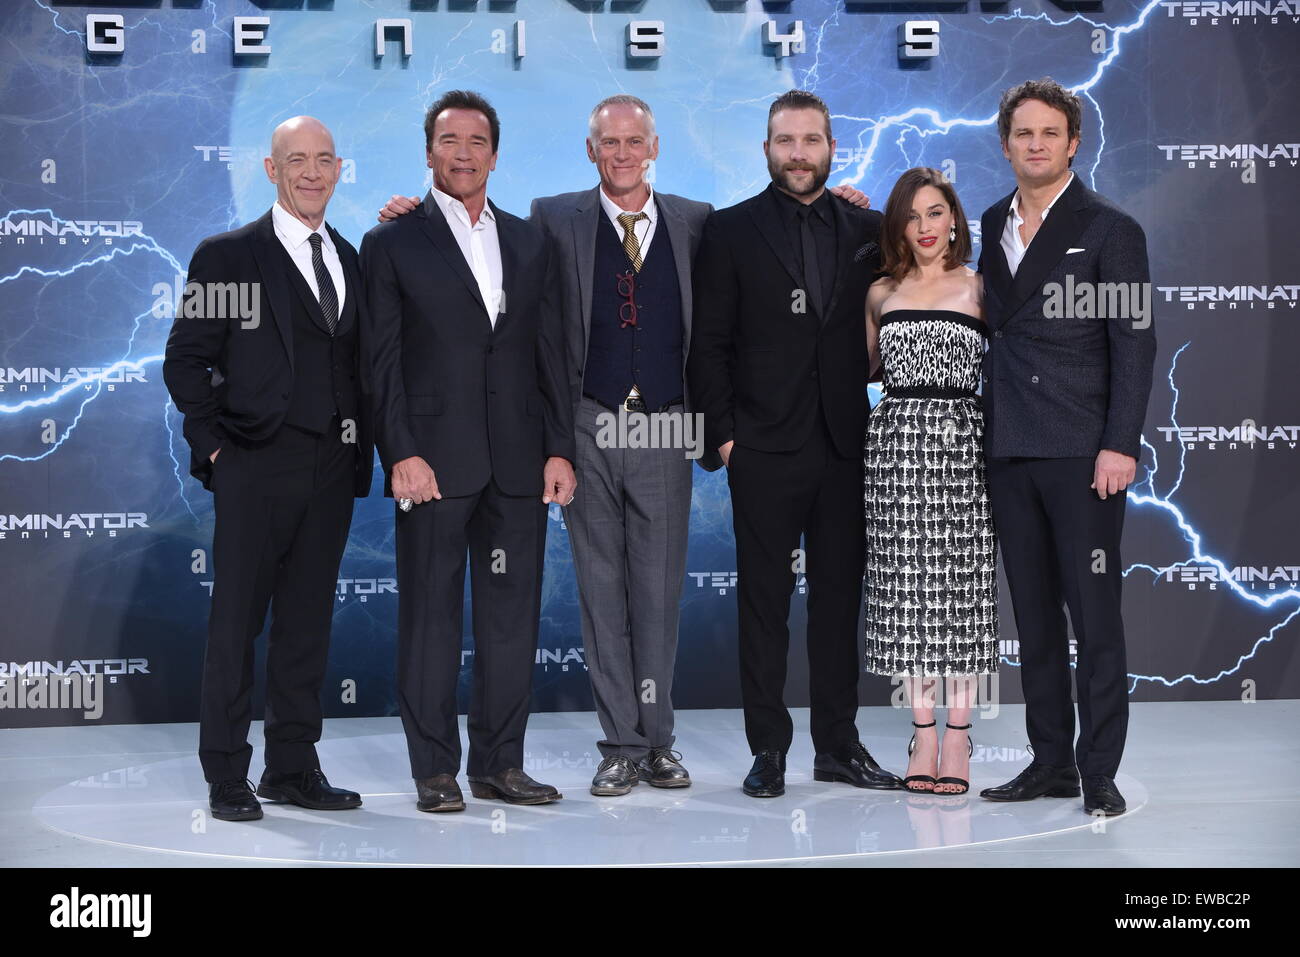 Berlin, Germany. 21st June, 2015. (l-r) American actor J.K. Simmons, Austrian-American actor and politician Arnold Schwarzenegger, American director Alan Taylor, Australian actor Jai Courtney British actress Emilia Clarke and Australian actor Jason Clarke attend the Premiere of the movie 'Terminator Genisys' at CineStar Theater at the Sony Center in Berlin, Germany. Credit:  dpa picture alliance/Alamy Live News Stock Photo